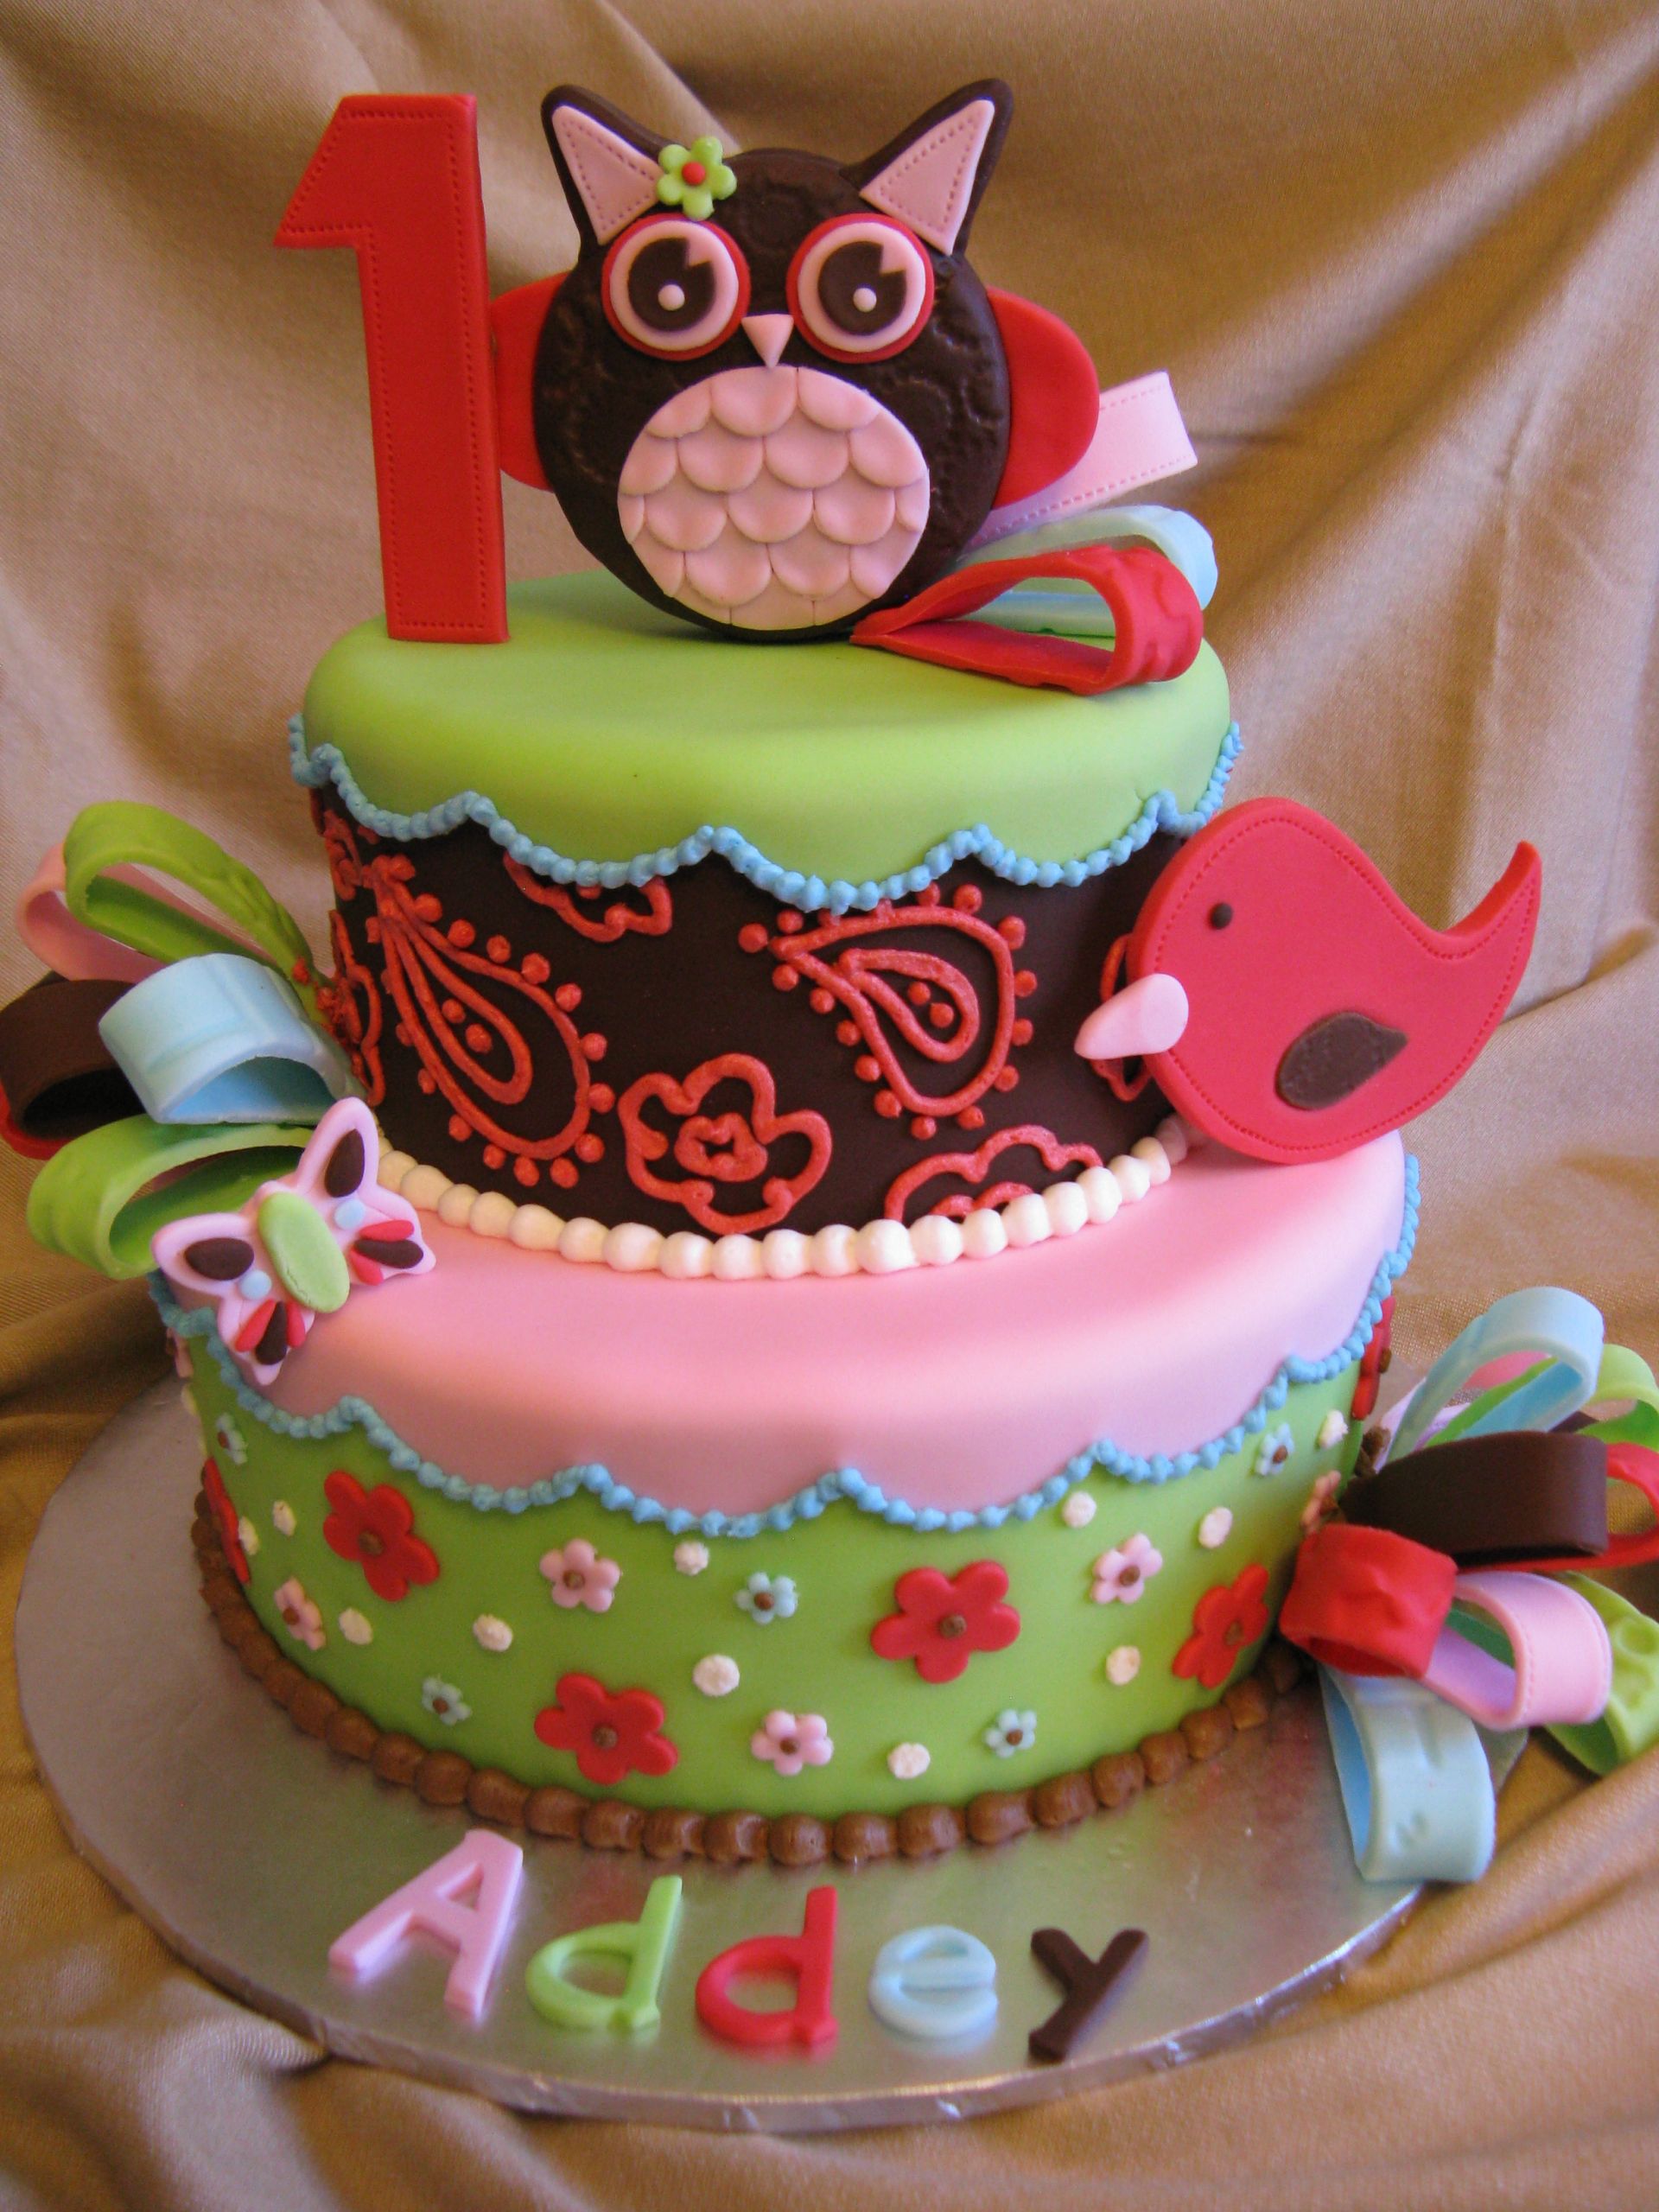 Toddler Birthday Cakes
 Kids Birthday Cakes Cakes by Joanne